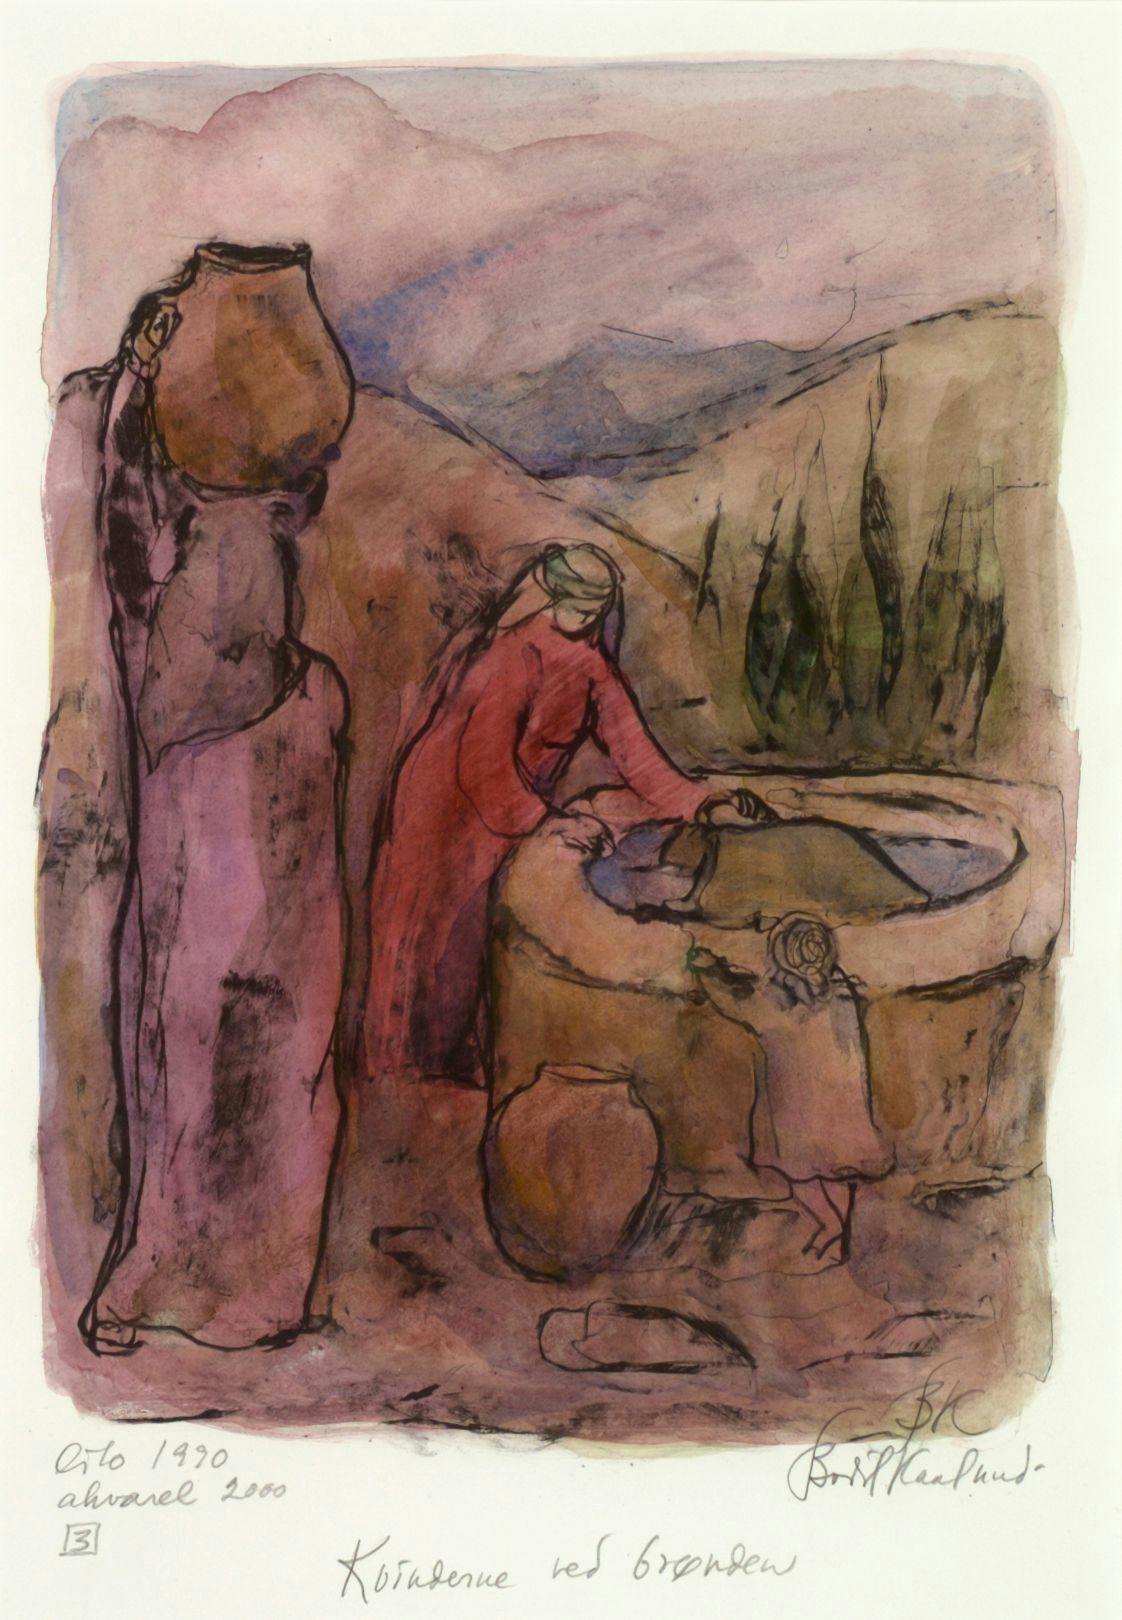 Artwork: Bodil Kaalund, The women by the well, 1988